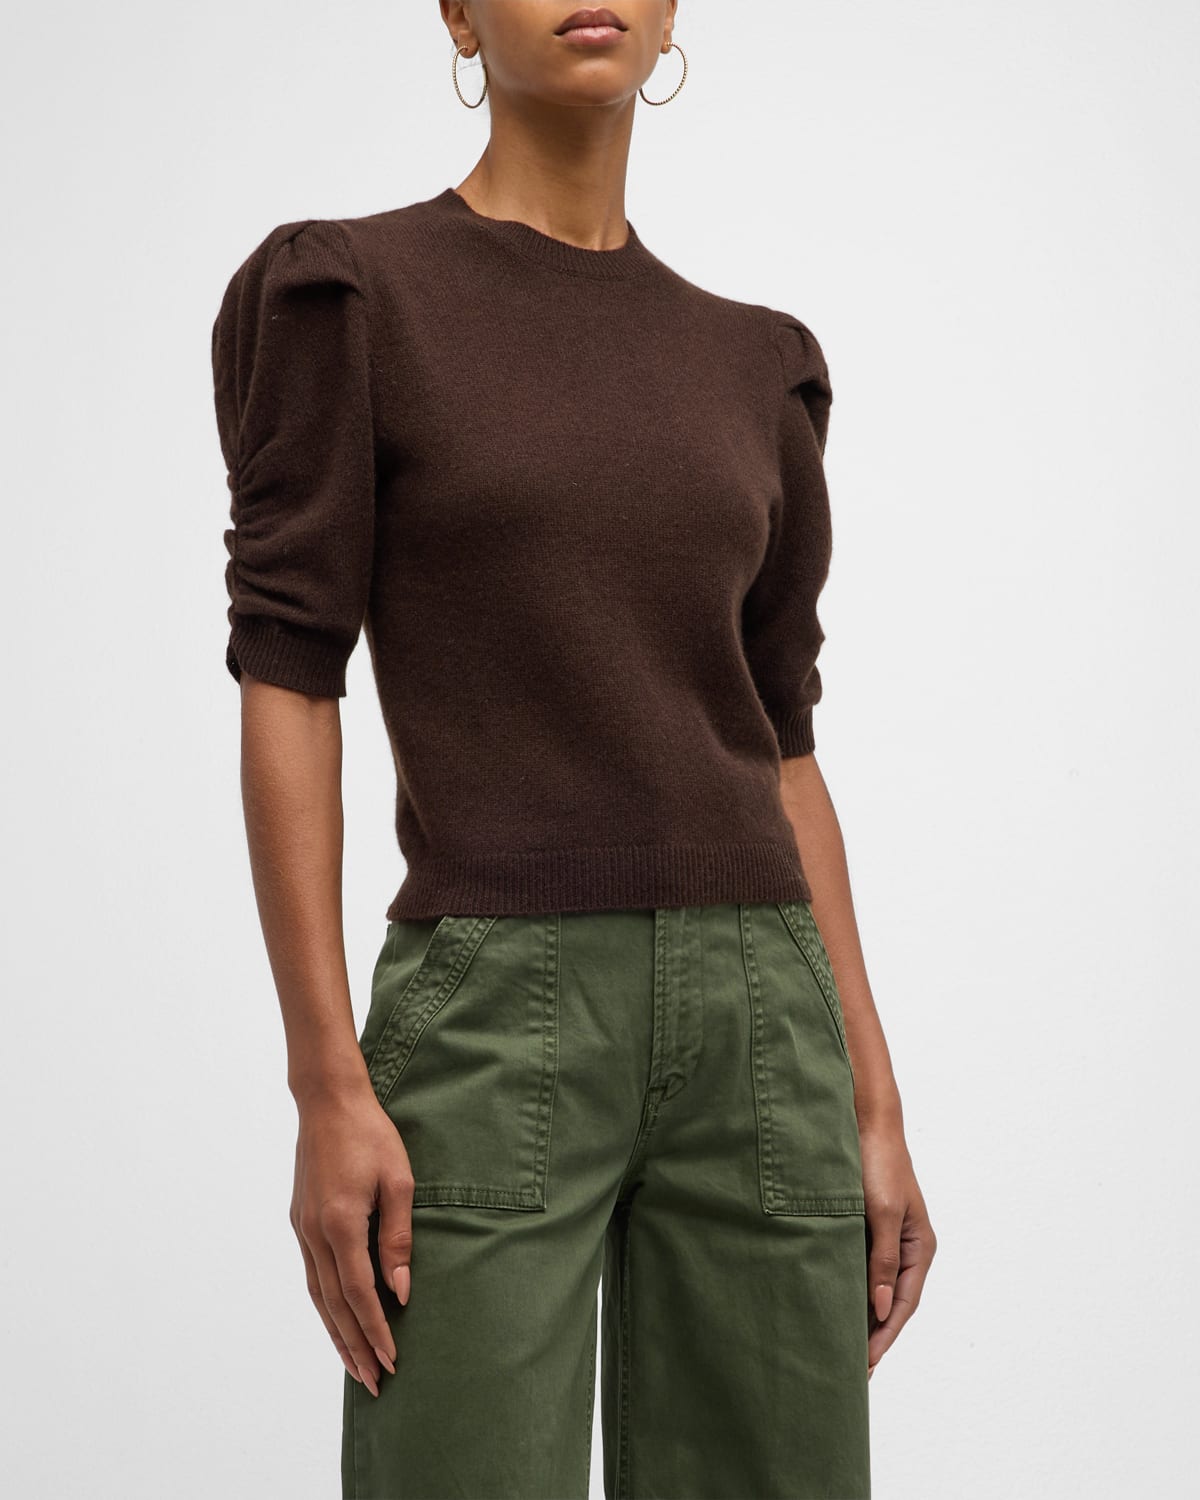 Ruched Cashmere Sweater